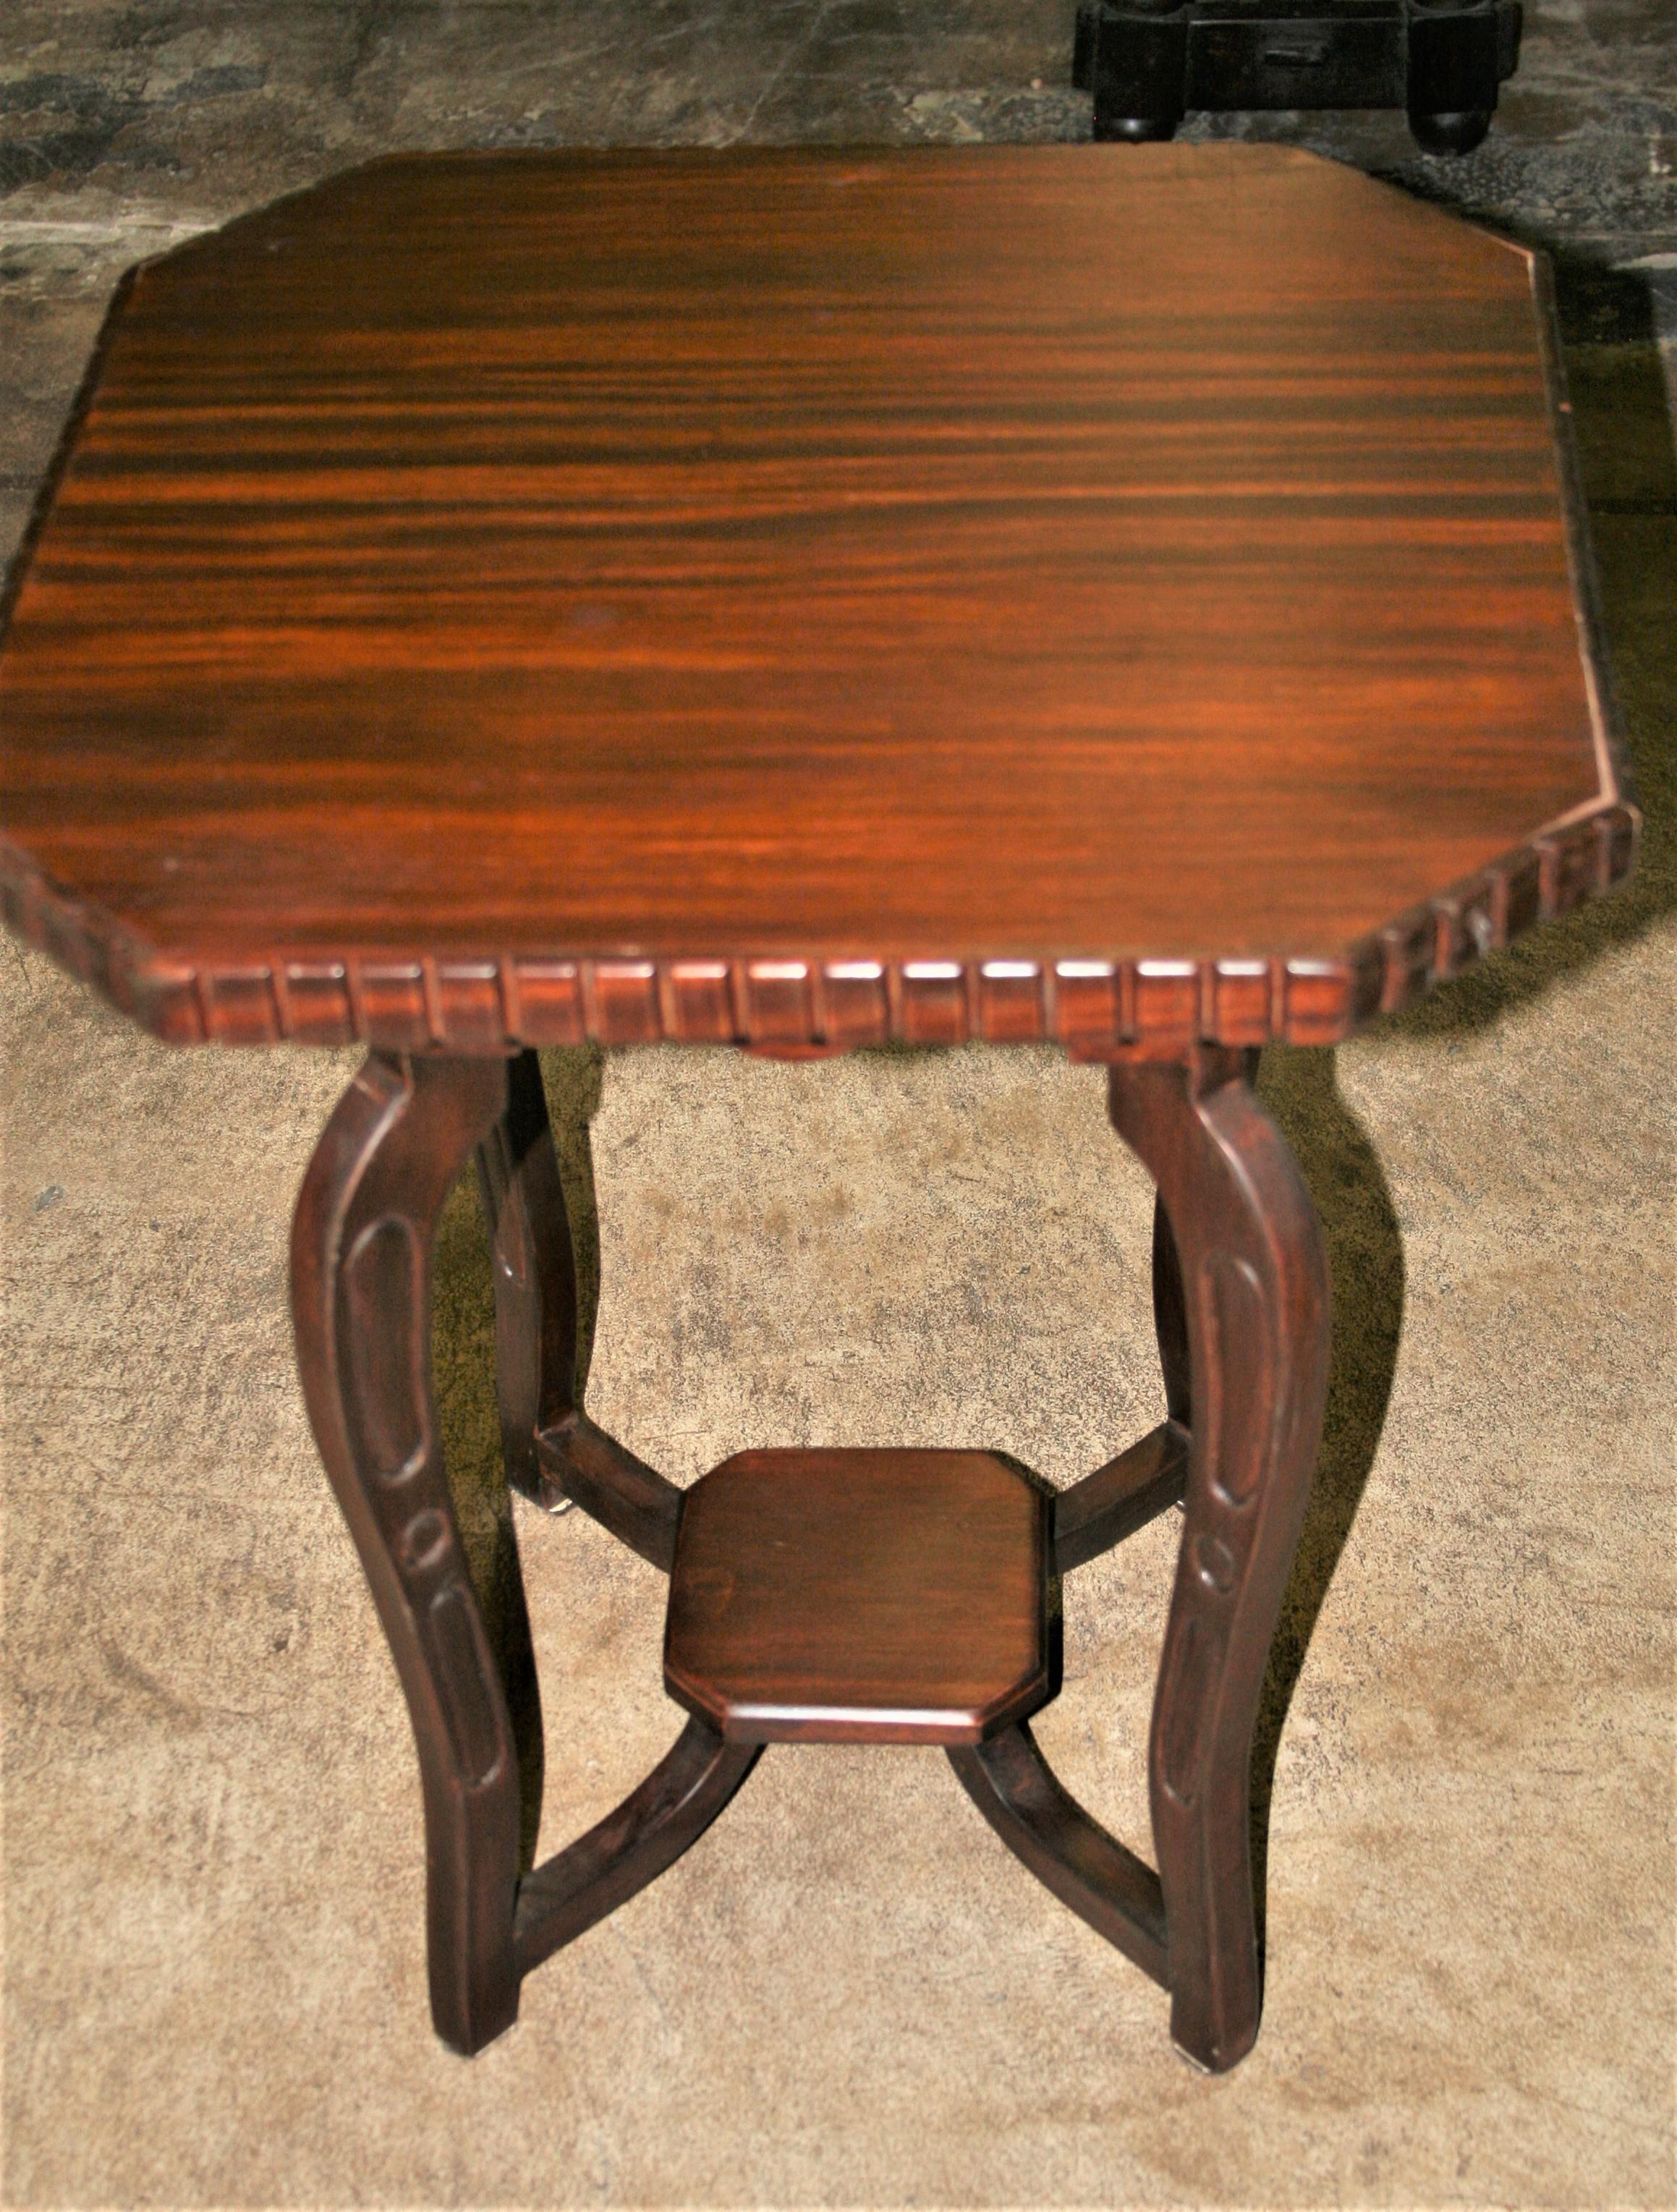 Hand-Crafted Pair of Early 20th Century Solid Nedun Wood Side Tables from Sri Lanka